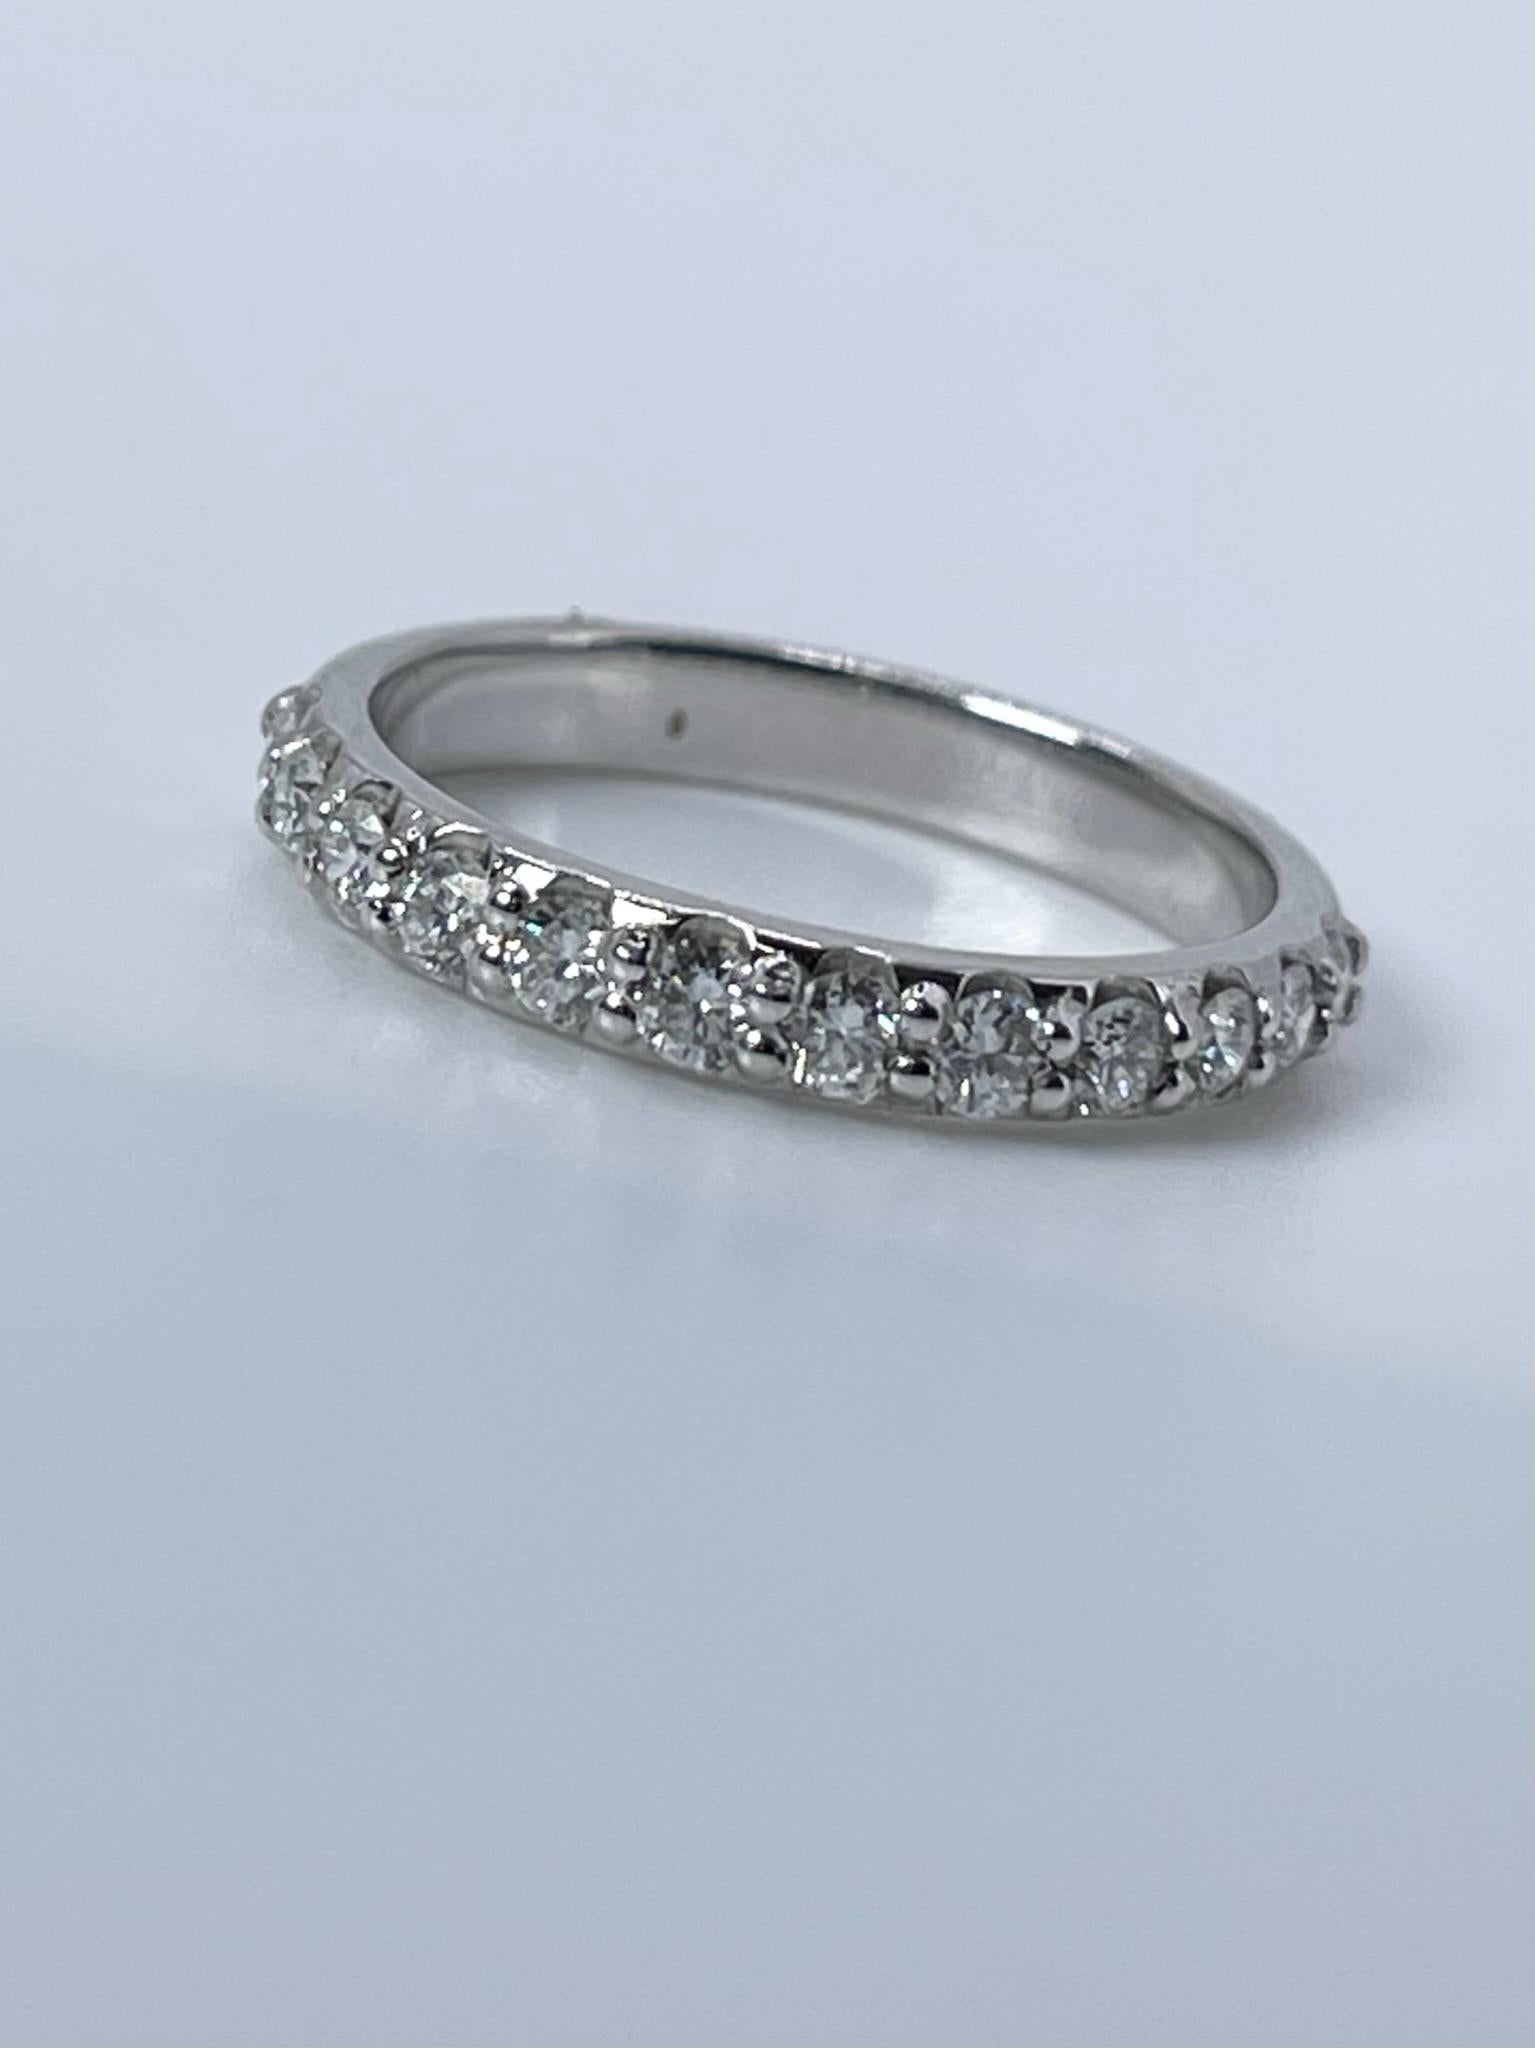 Half way set wedding band with natural diamonds in platinum.
ITEM#: IFI 110-00004
GRAM WEIGHT: 2.90gr
METAL: PLATINUM

NATURAL DIAMOND(S)
Cut: Round Brilliant
Color: F-G
Clarity: VS-SI 
Carat: 0.58ct
Size: 7.5 ( can be re-sized)


WHAT YOU GET AT